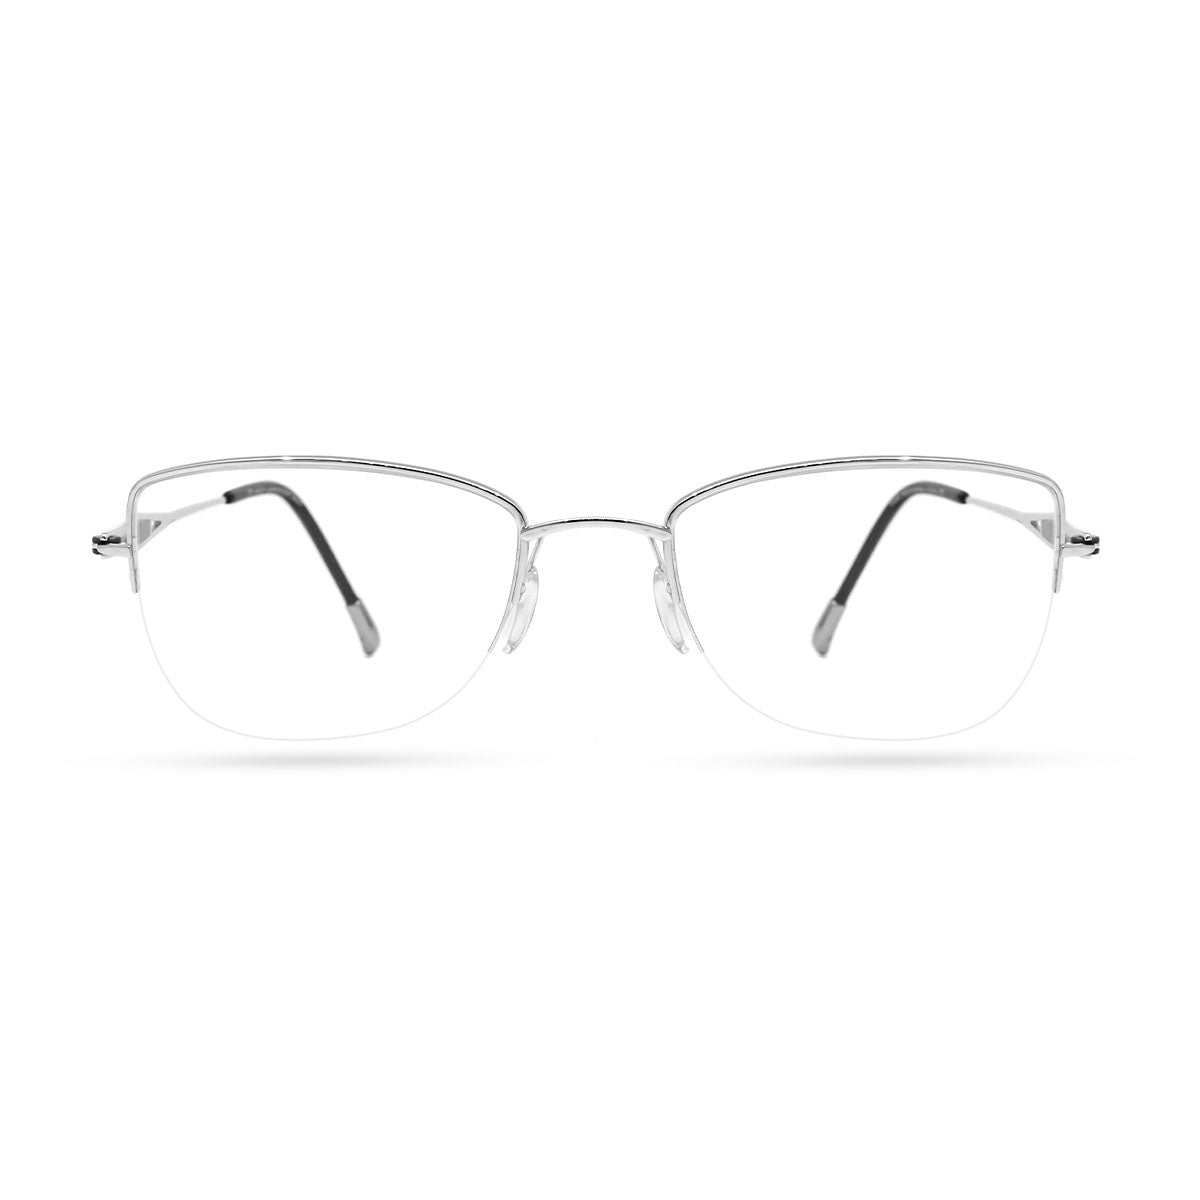 SILHOUETTE 4308 00 6050 spectacle-frame